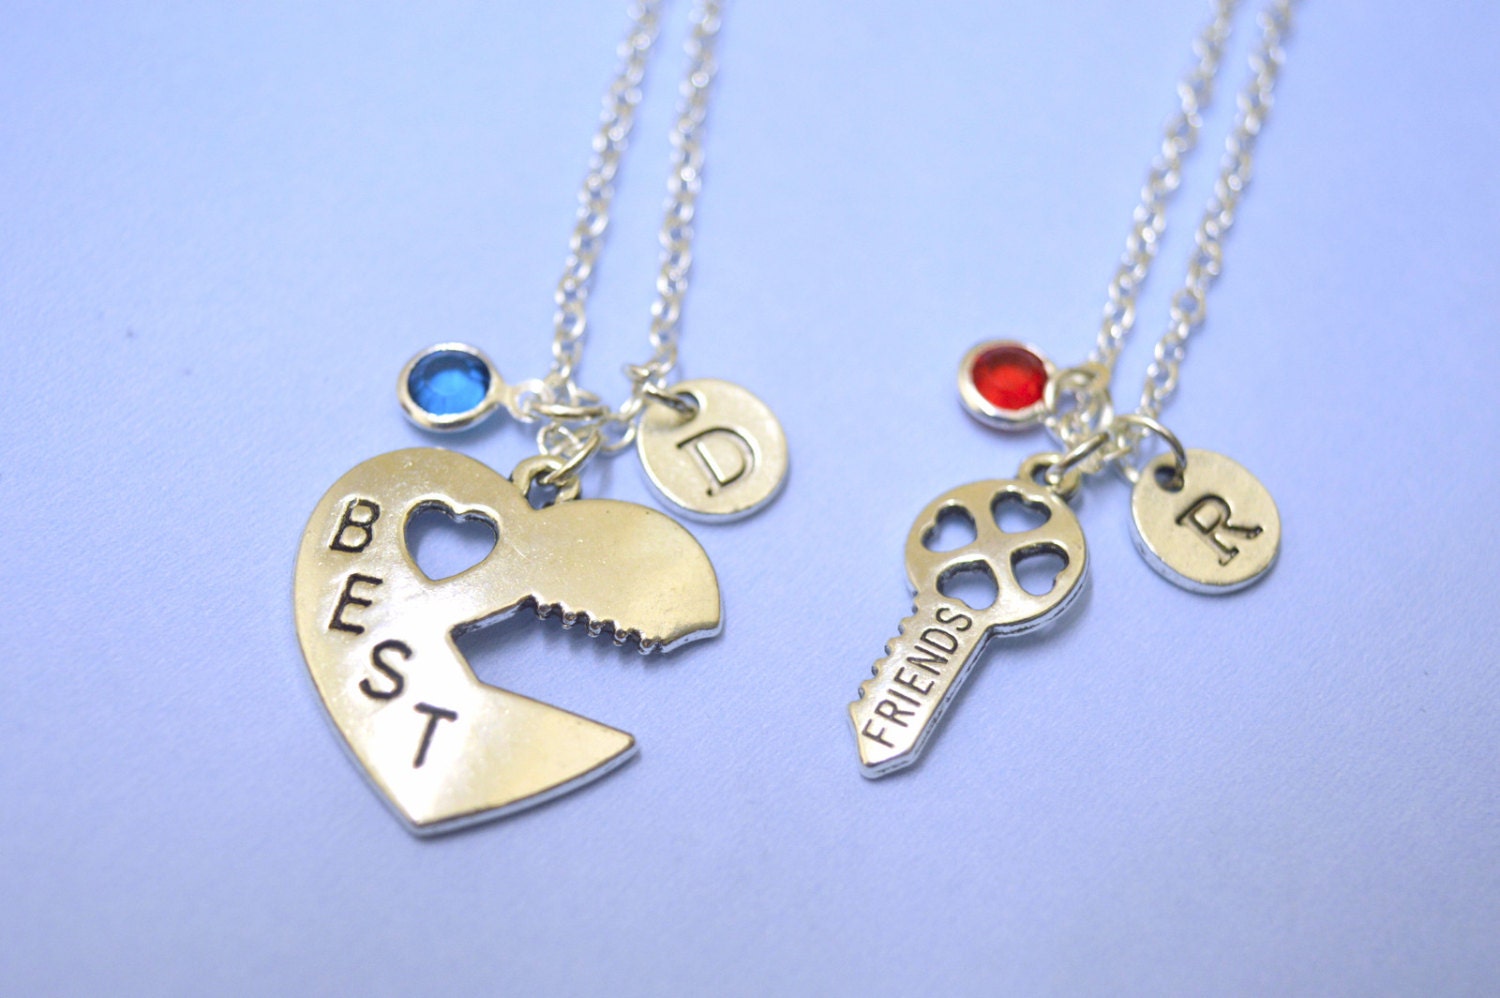 Lock and Key Necklaces, Graduation Friendship Necklace, heart key set, Lock and Key, Partners in crime, initials jewelry, heart Necklace